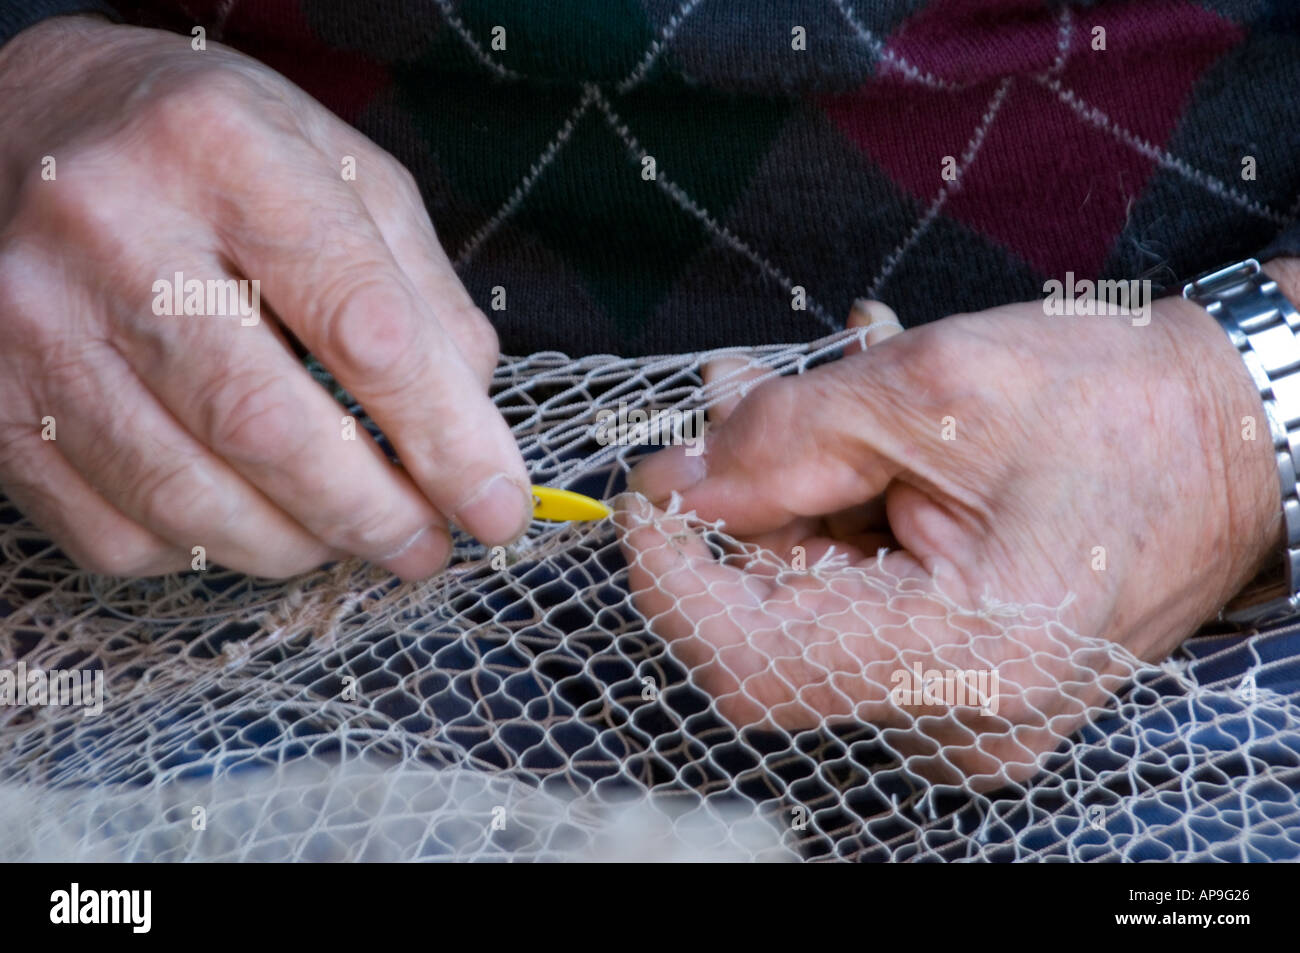 Elderly hands repairing a fishing net the old fashion way Stock Photo -  Alamy